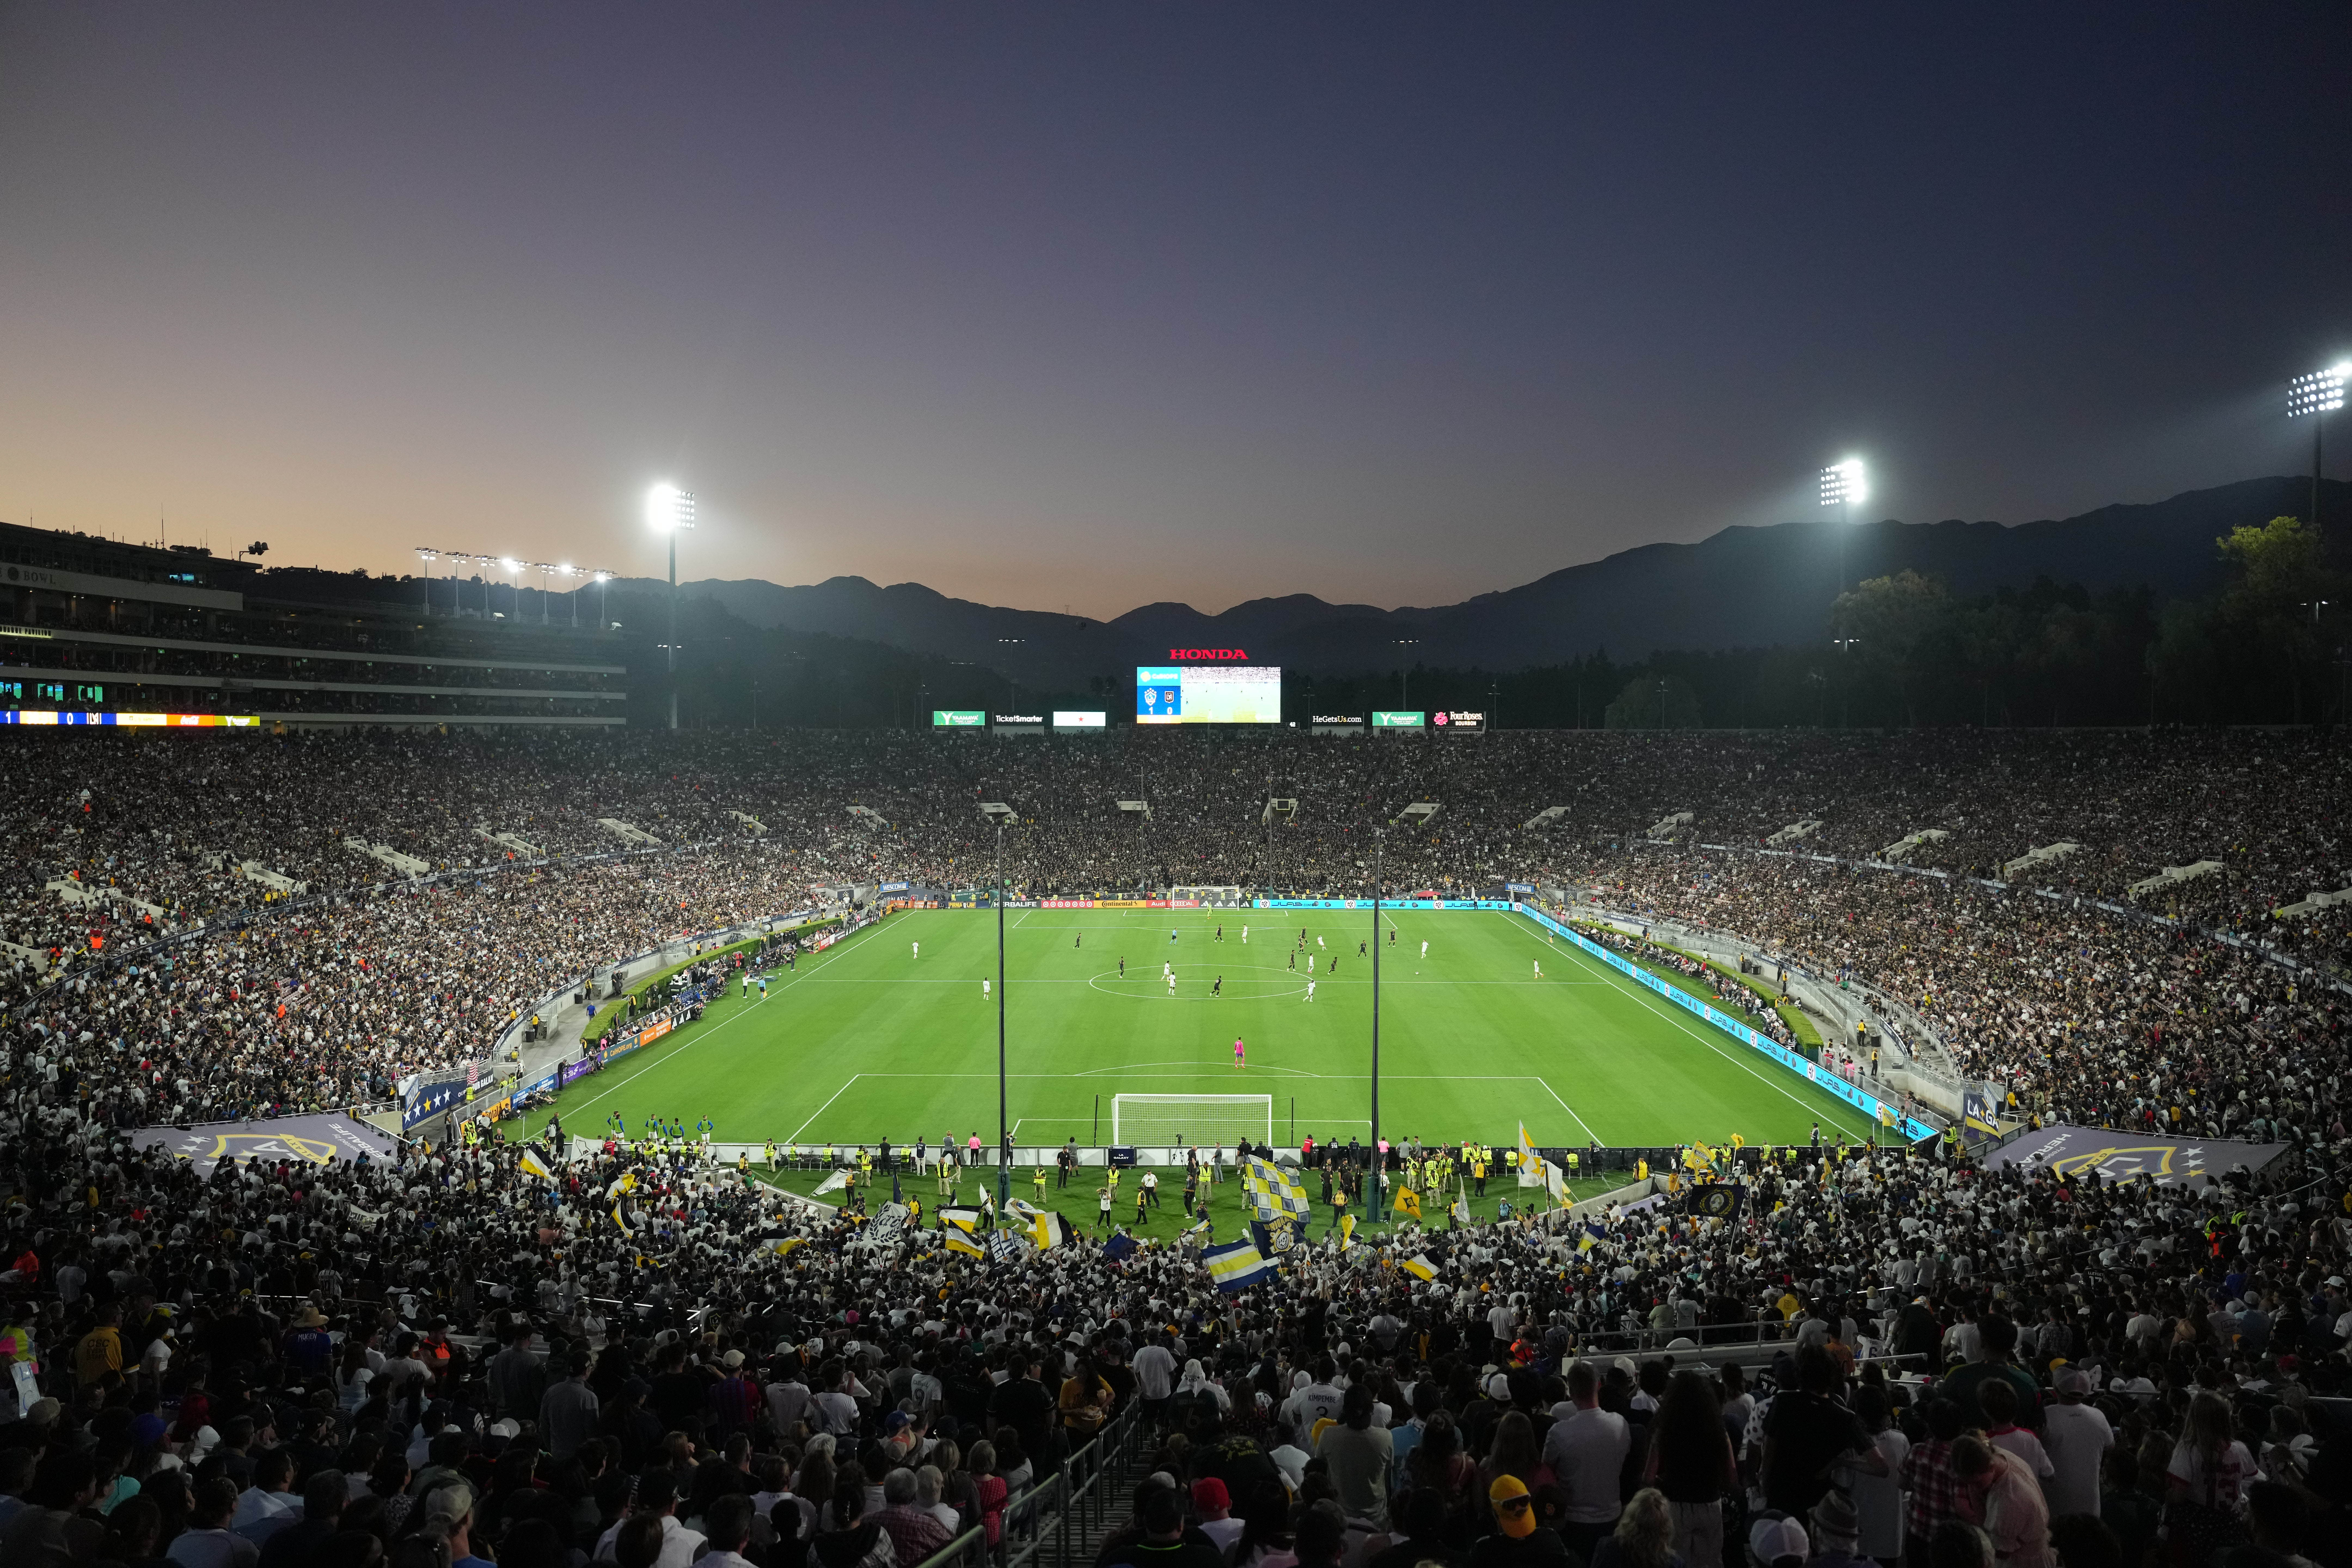 LA Galaxy set to take on Barcelona FC in sold-out Rose Bowl